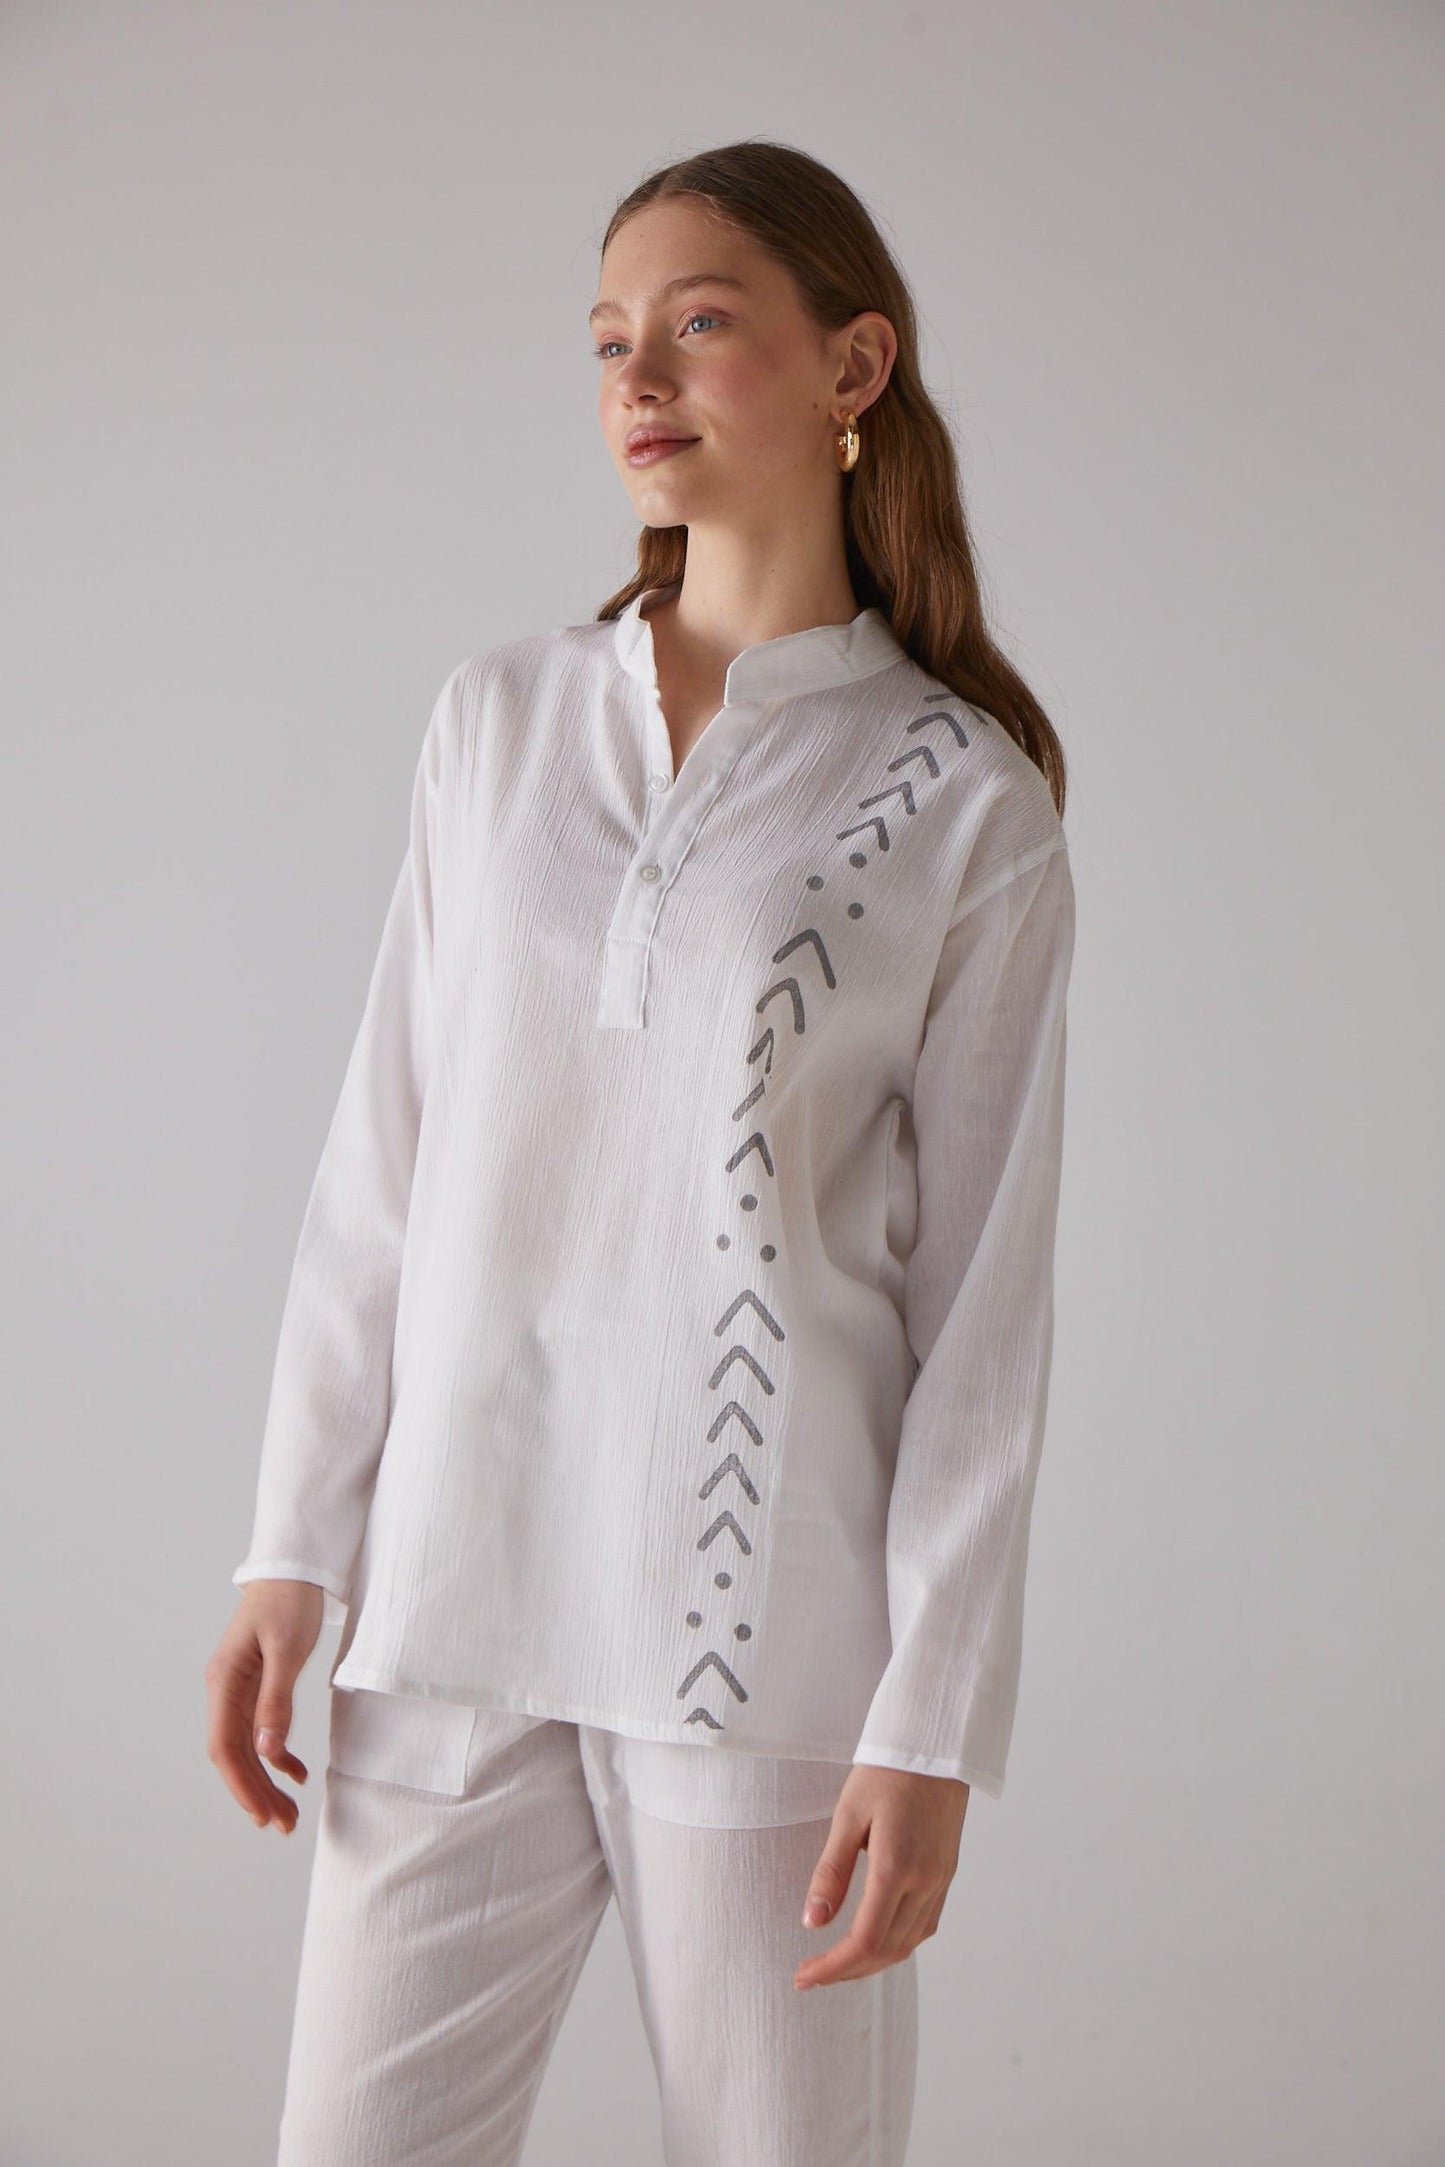 Long - Sleeve White Shirt with V Desing Pattern - 100% Organic Cotton - trendynow